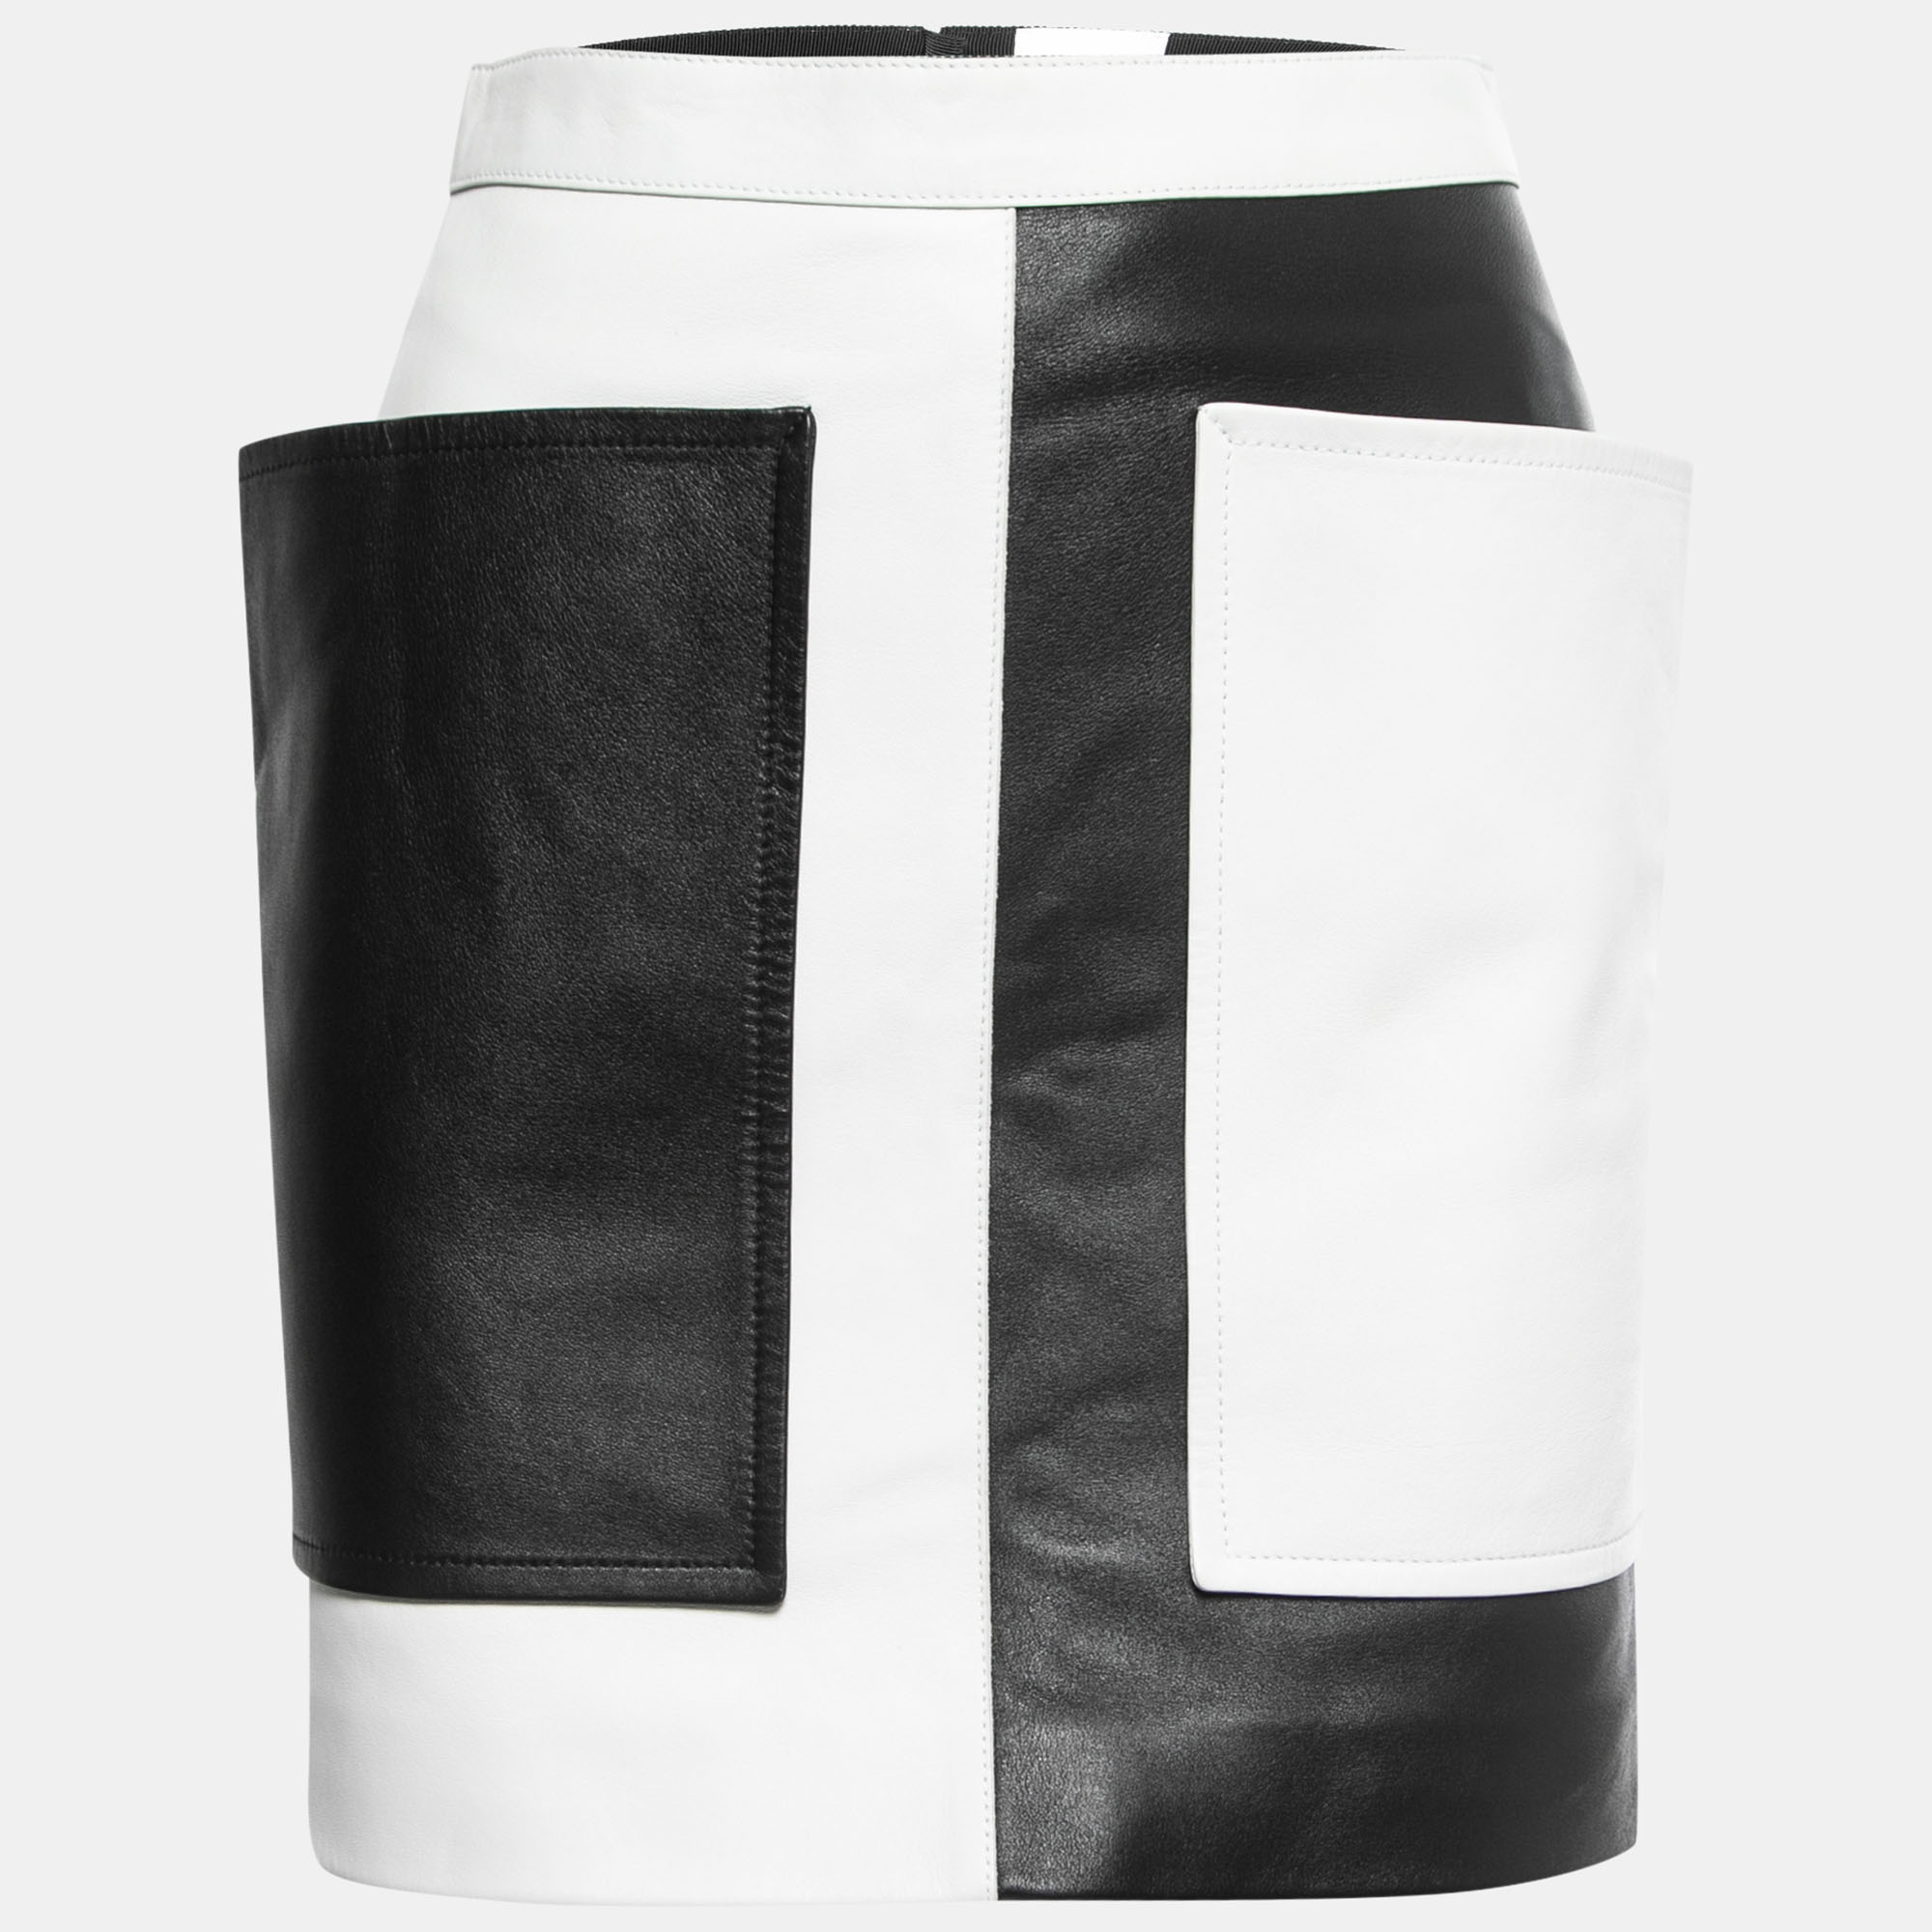 Burberry color block leather overlay detail short skirt xs